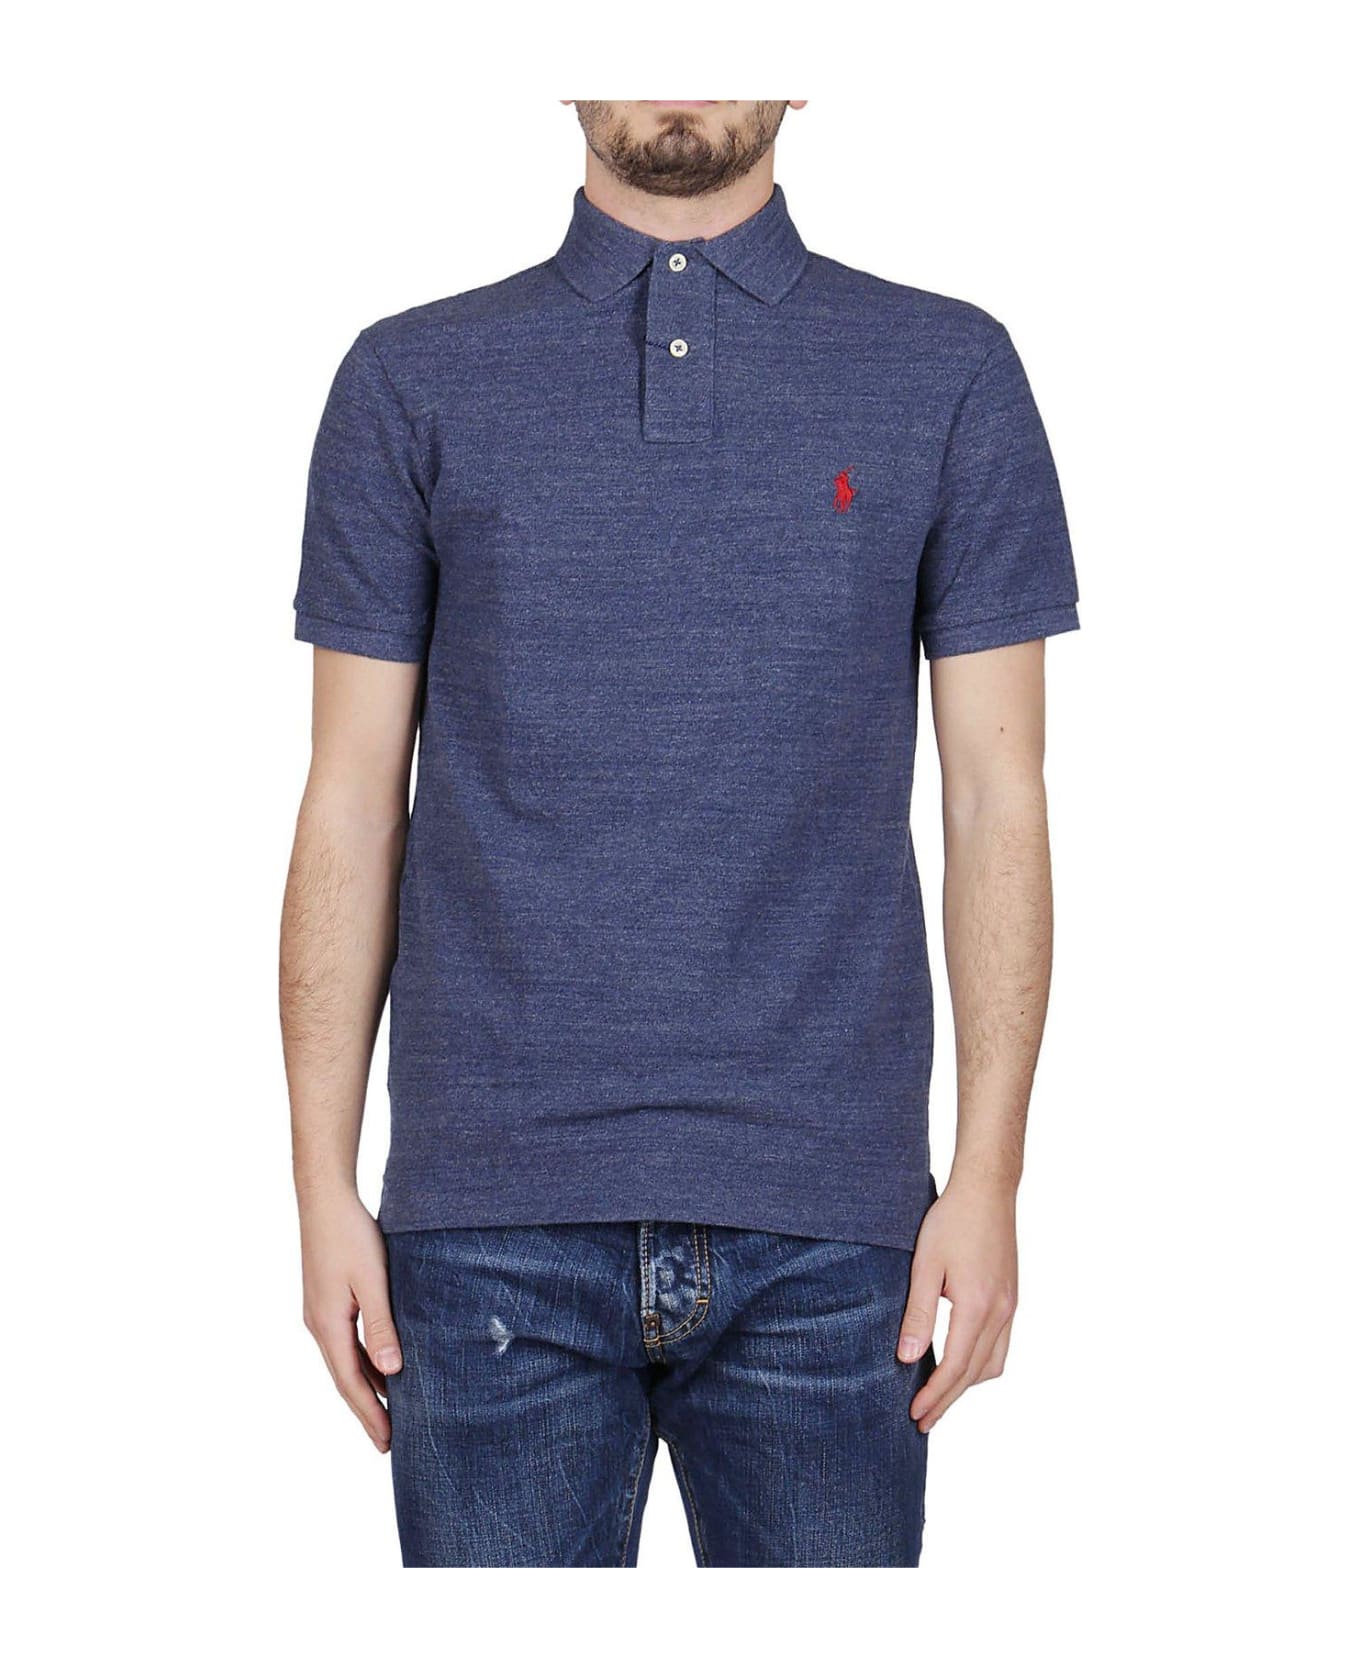 Polo Ralph Lauren Logo Embroidered Polo Shirt - Blue ポロシャツ